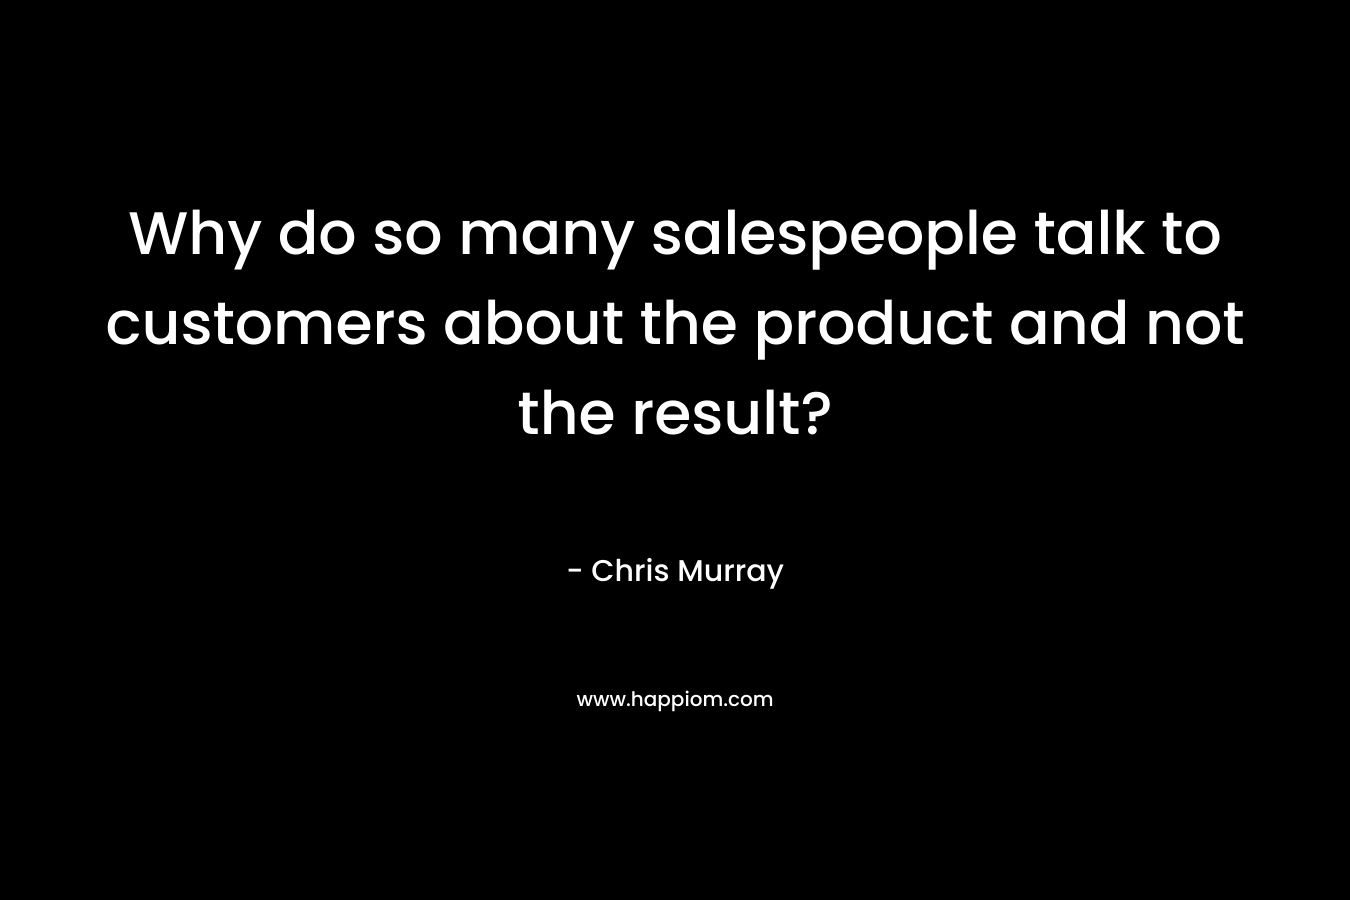 Why do so many salespeople talk to customers about the product and not the result?